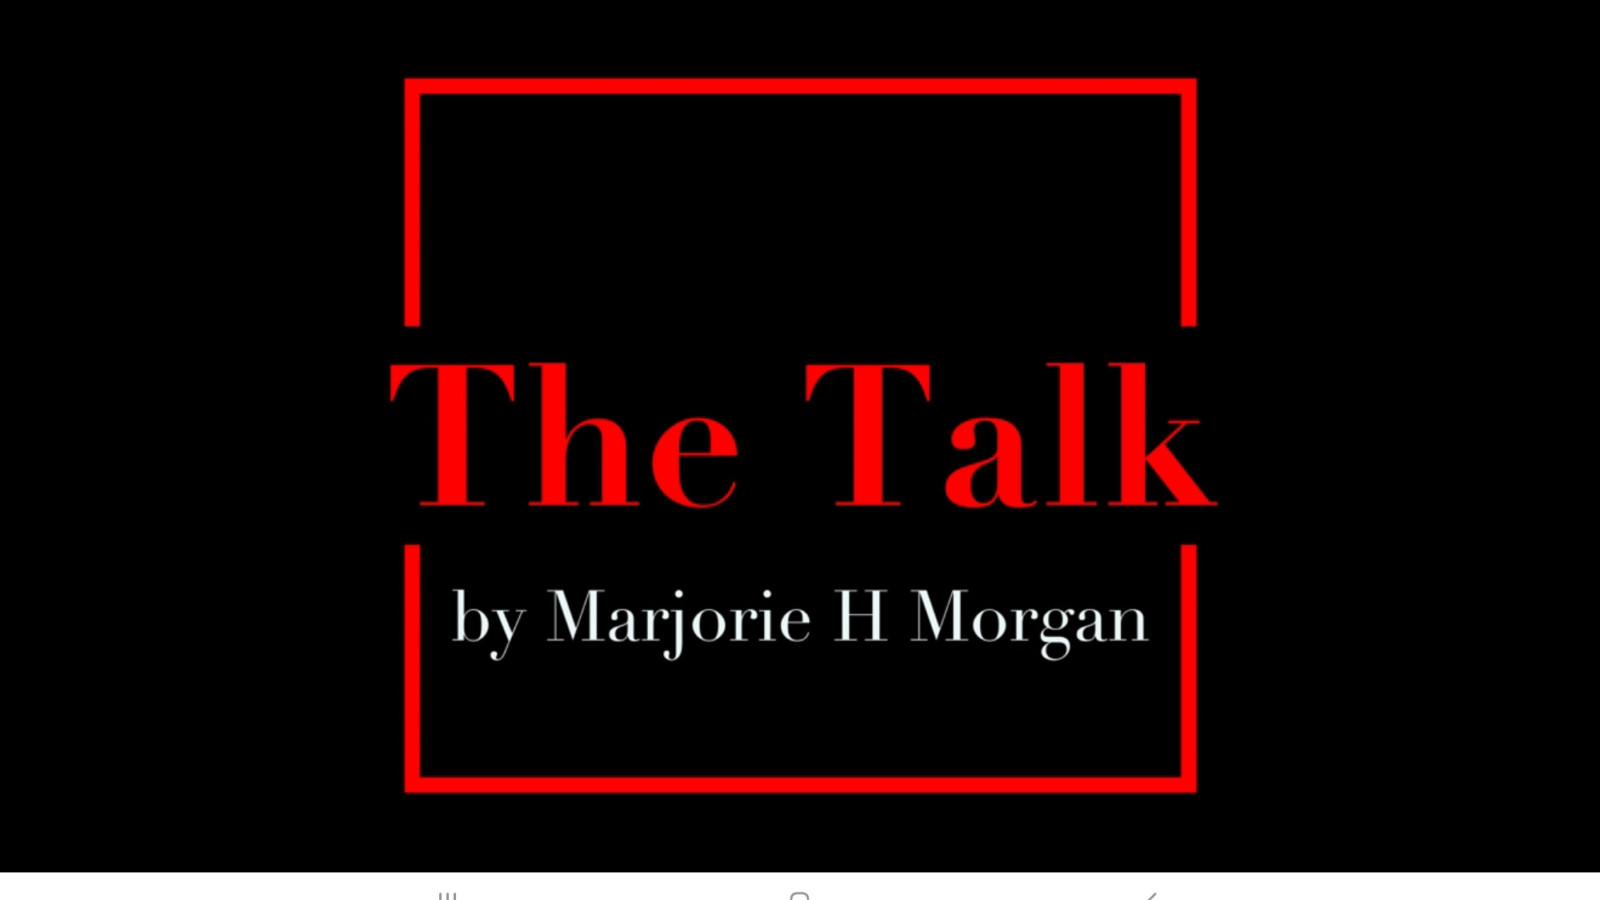 On a black background a red outline of a box with the words 'The Talk' in large red text and 'by Morjorie H Morgan' in white text underneath.